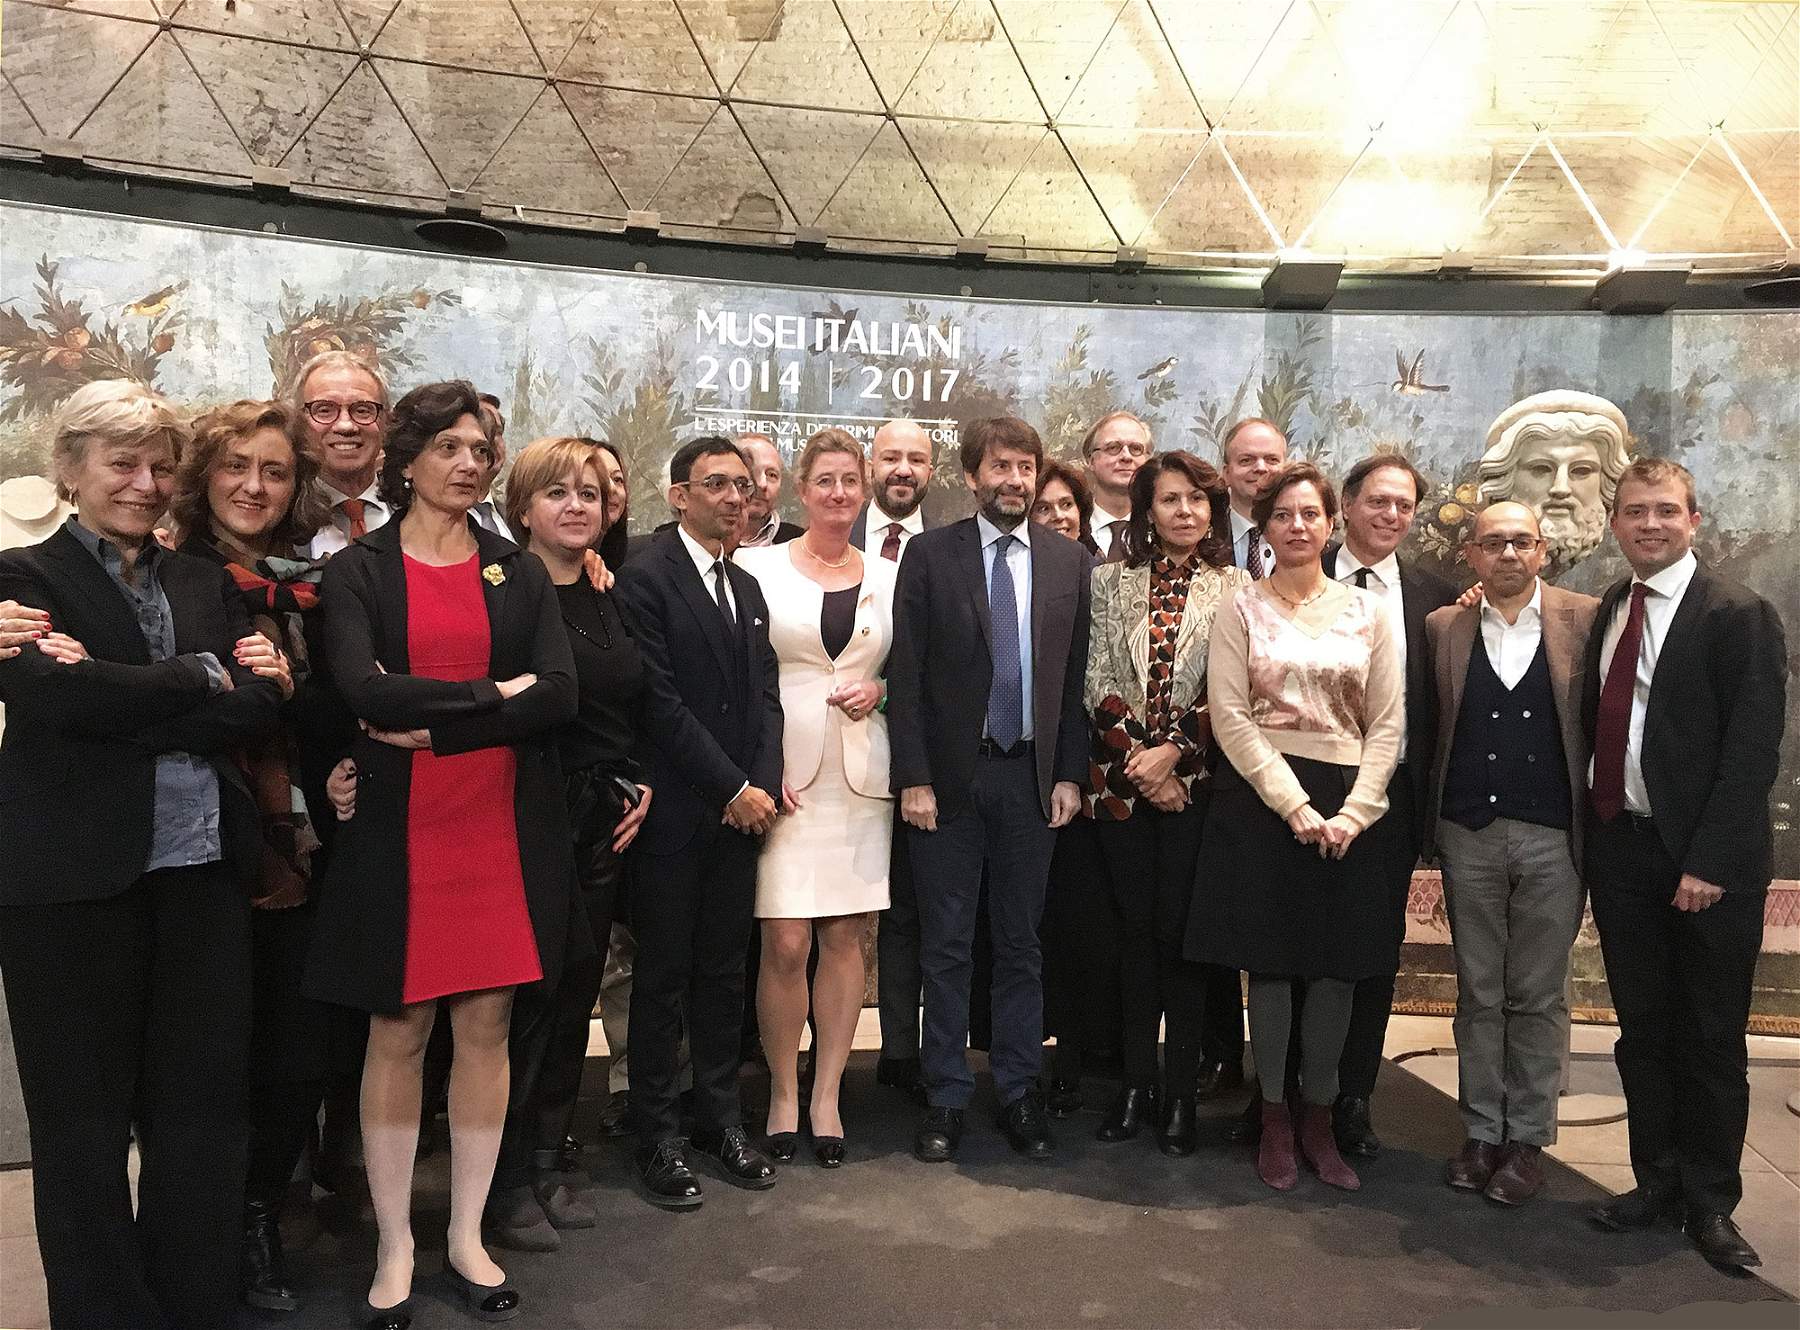 Franceschini meets with super museum directors and rattles off reform numbers